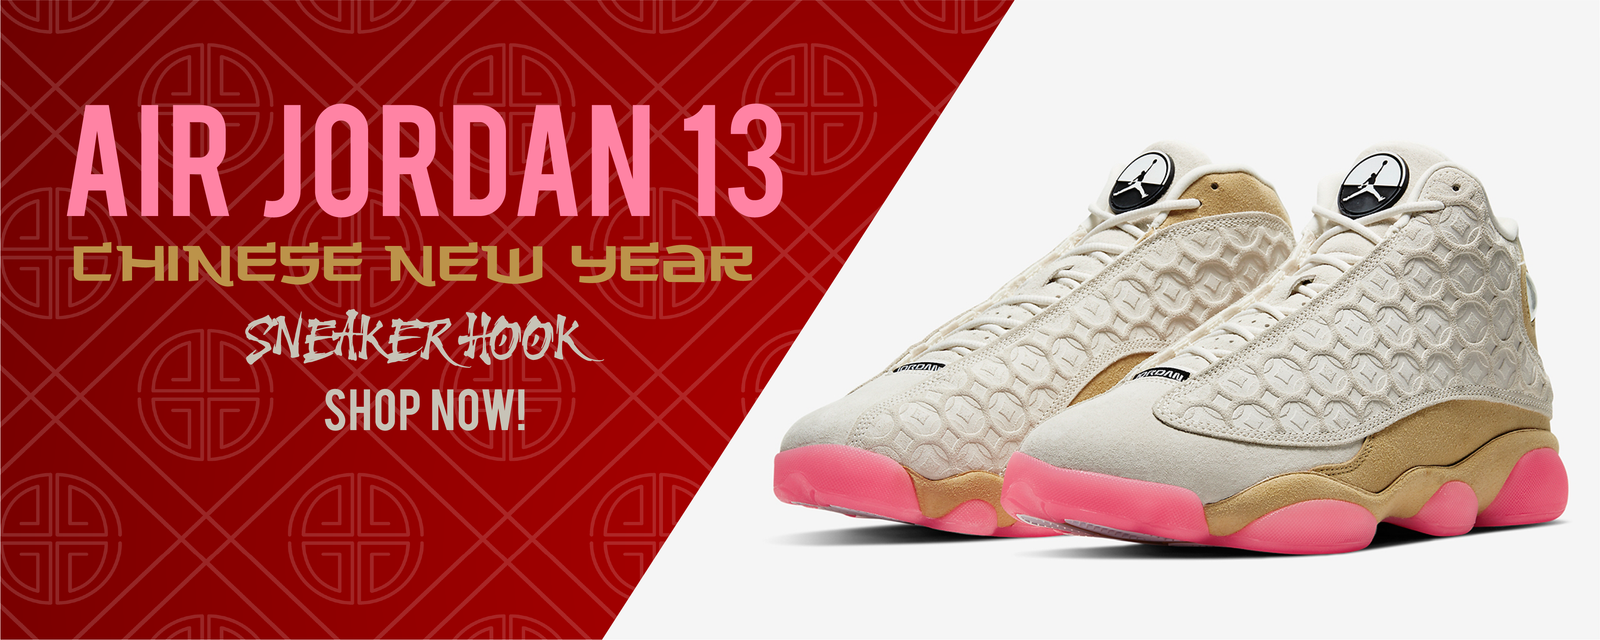 jordan 13 retro chinese new year outfit